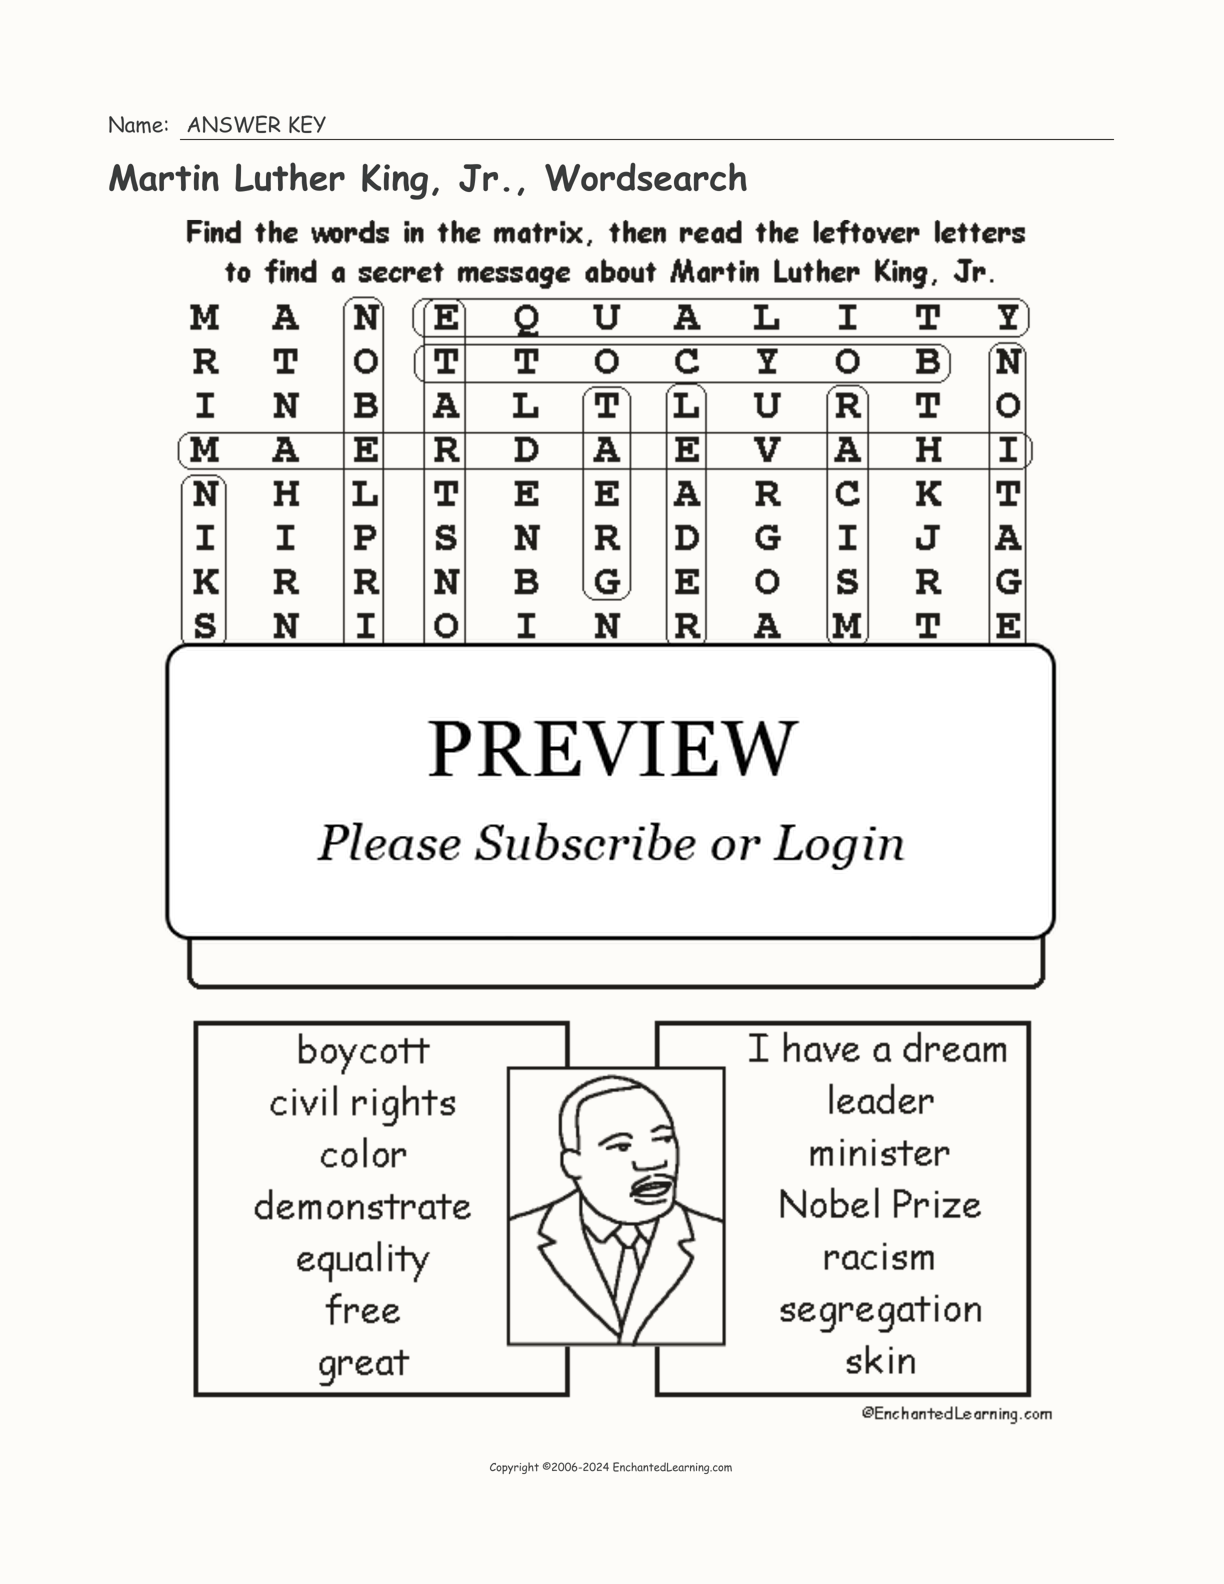 Martin Luther King, Jr., Wordsearch interactive worksheet page 2